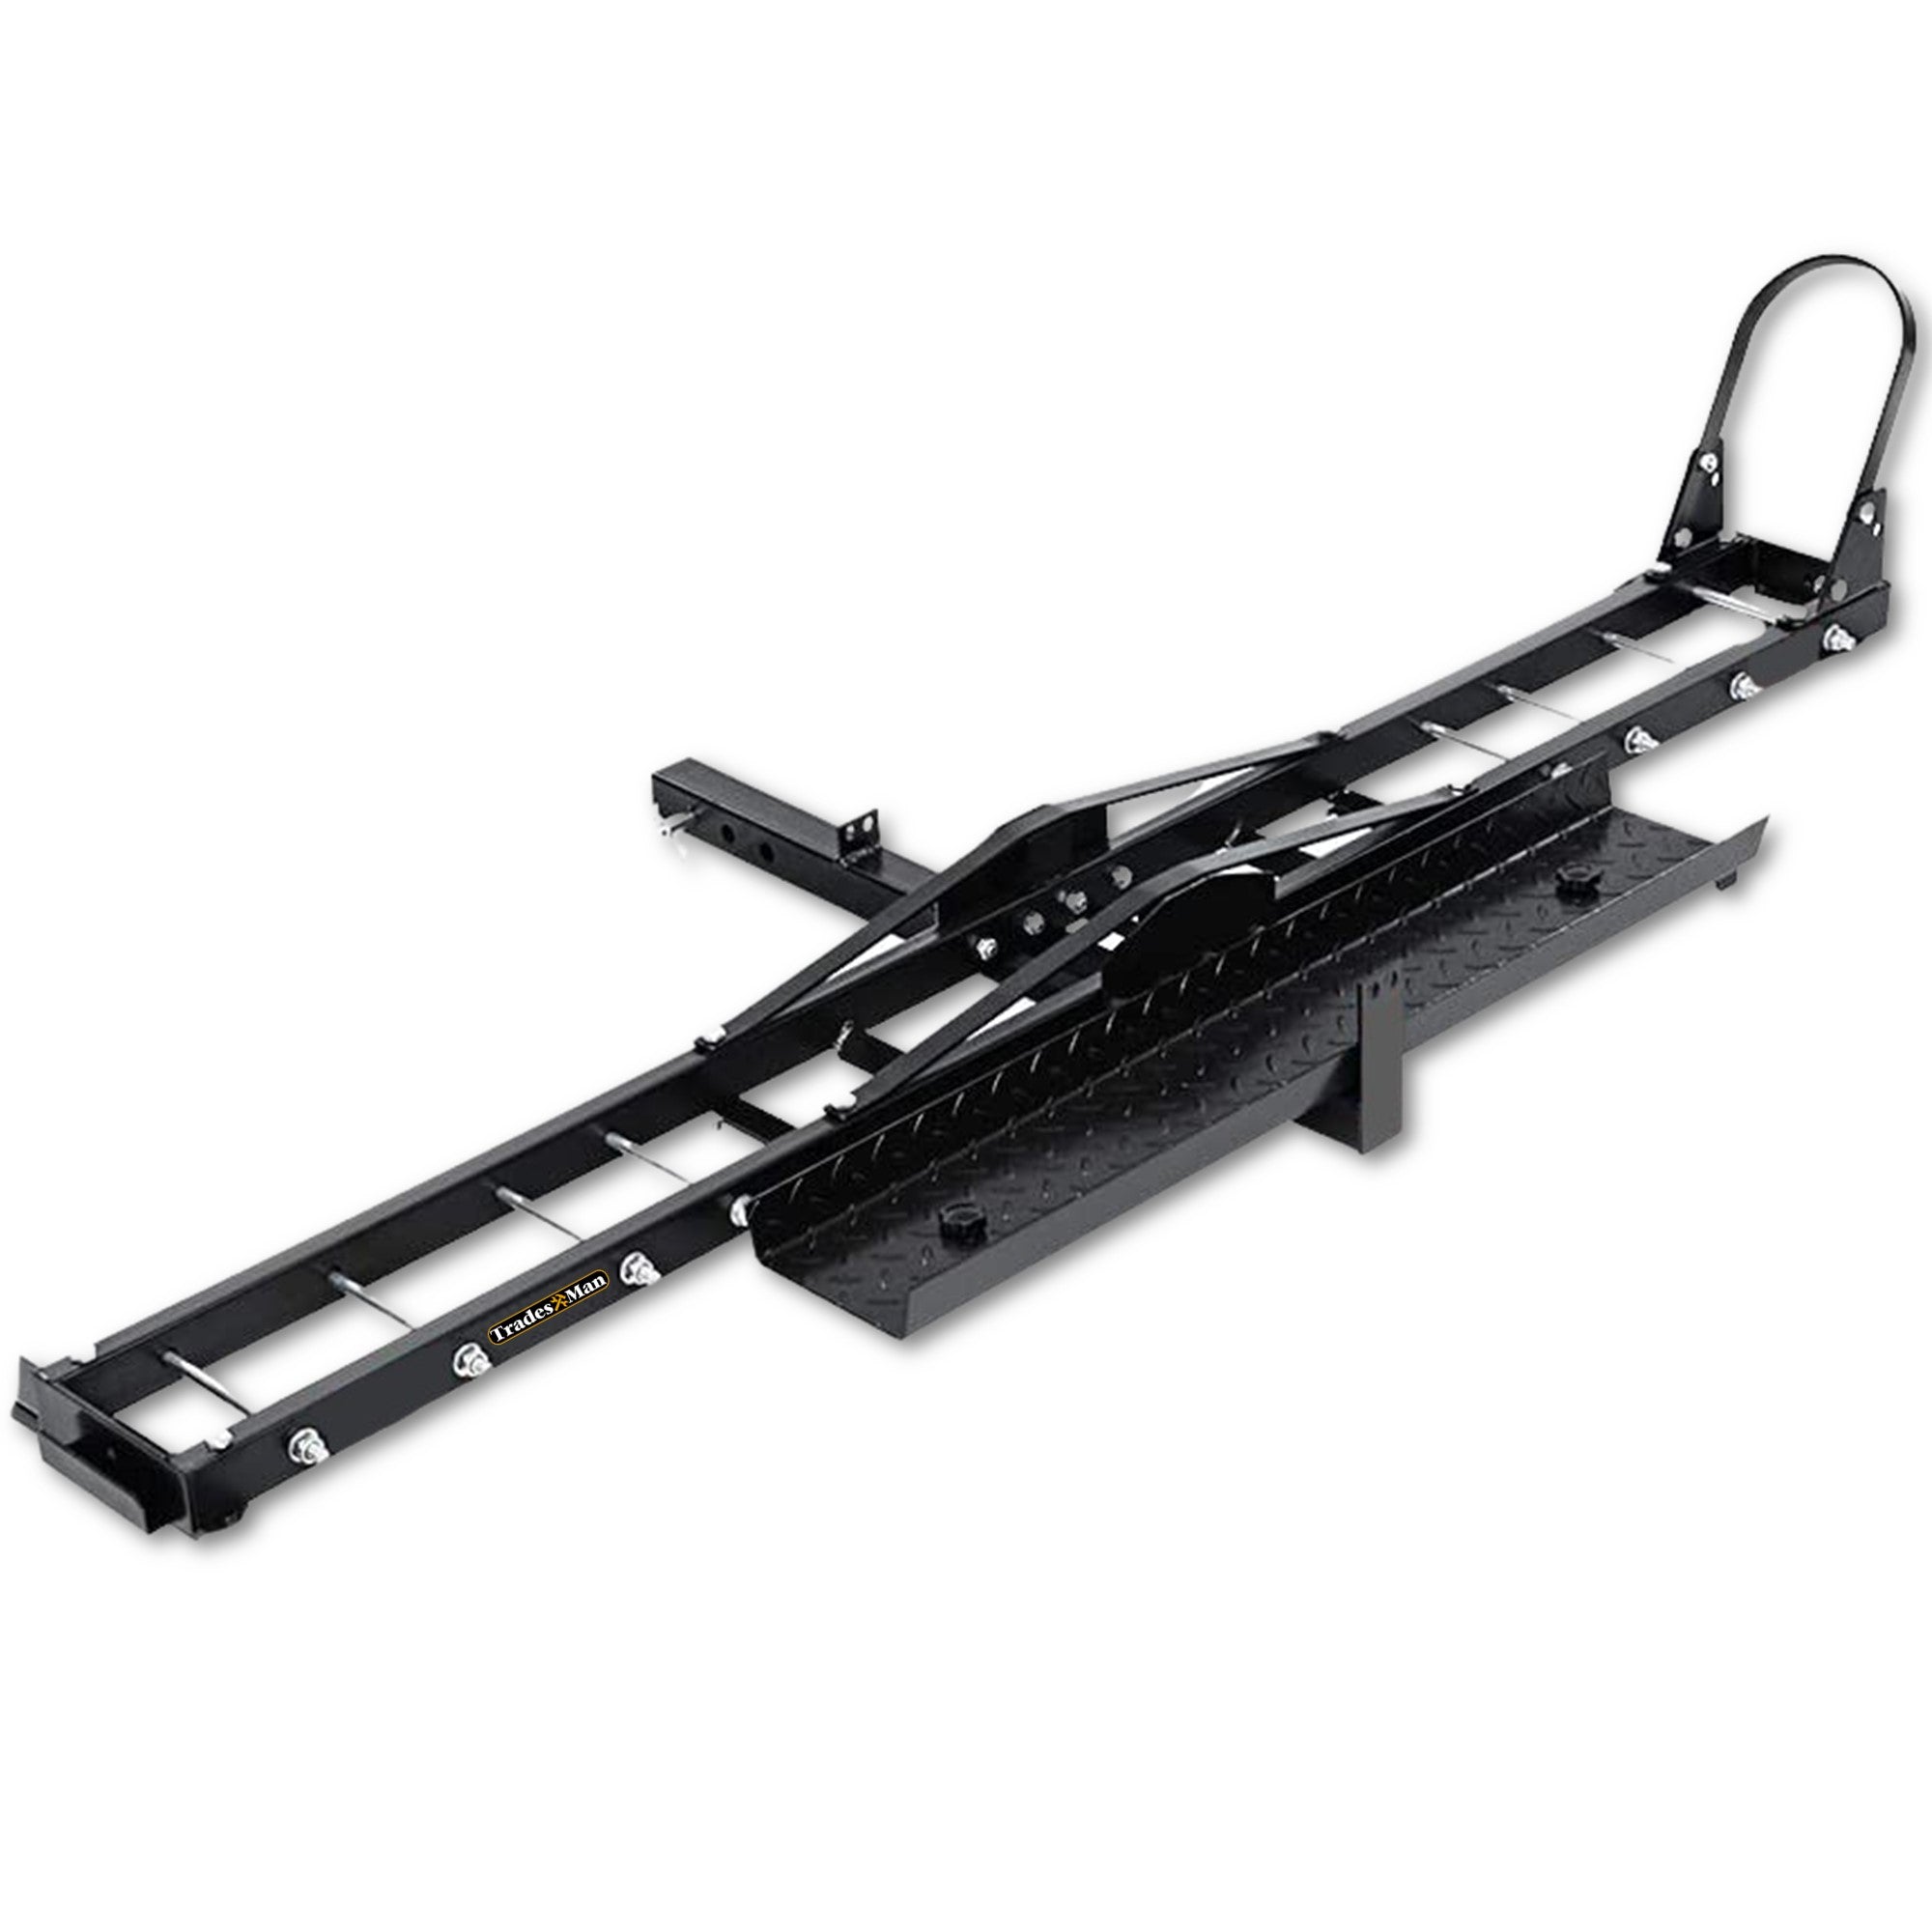 Motorcycle Carrier Rack 2 Arms Ramp Motorbike 2'' Hitch Tow Bar Towbar